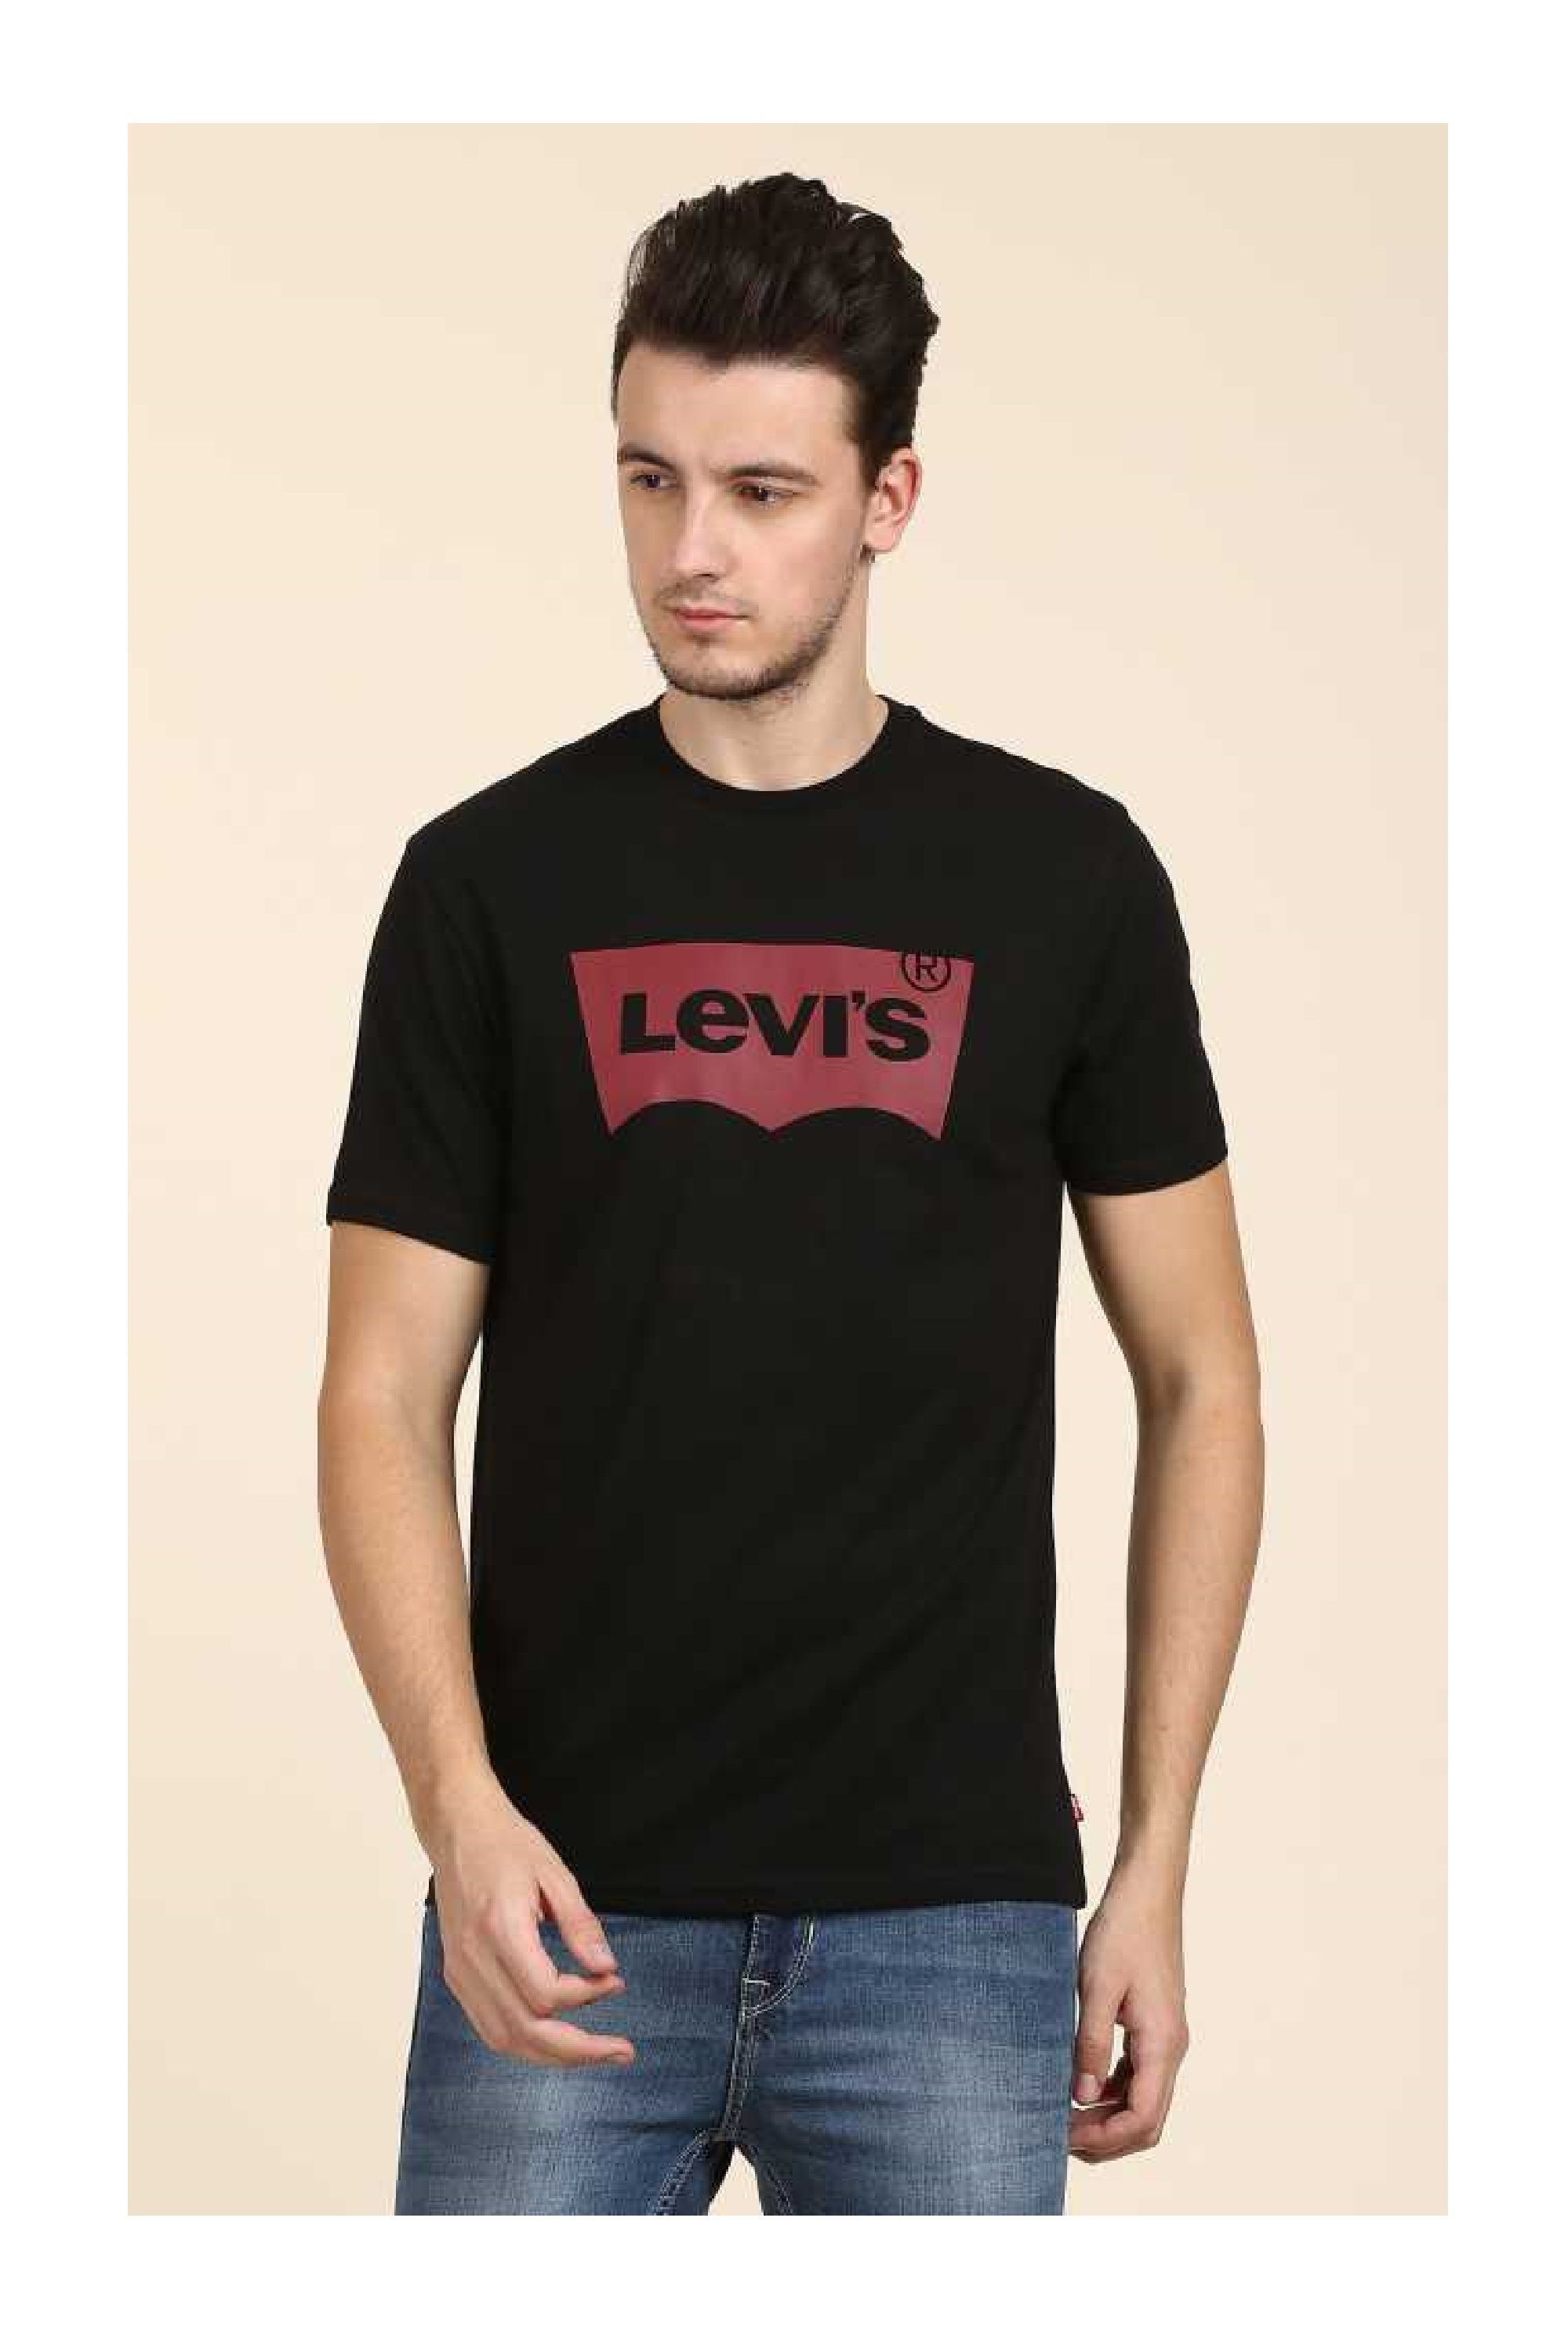 Levi's 100 Percent Cotton White Printed T-Shirt - Buy Levi's 100 Percent  Cotton White Printed T-Shirt Online at Low Price 